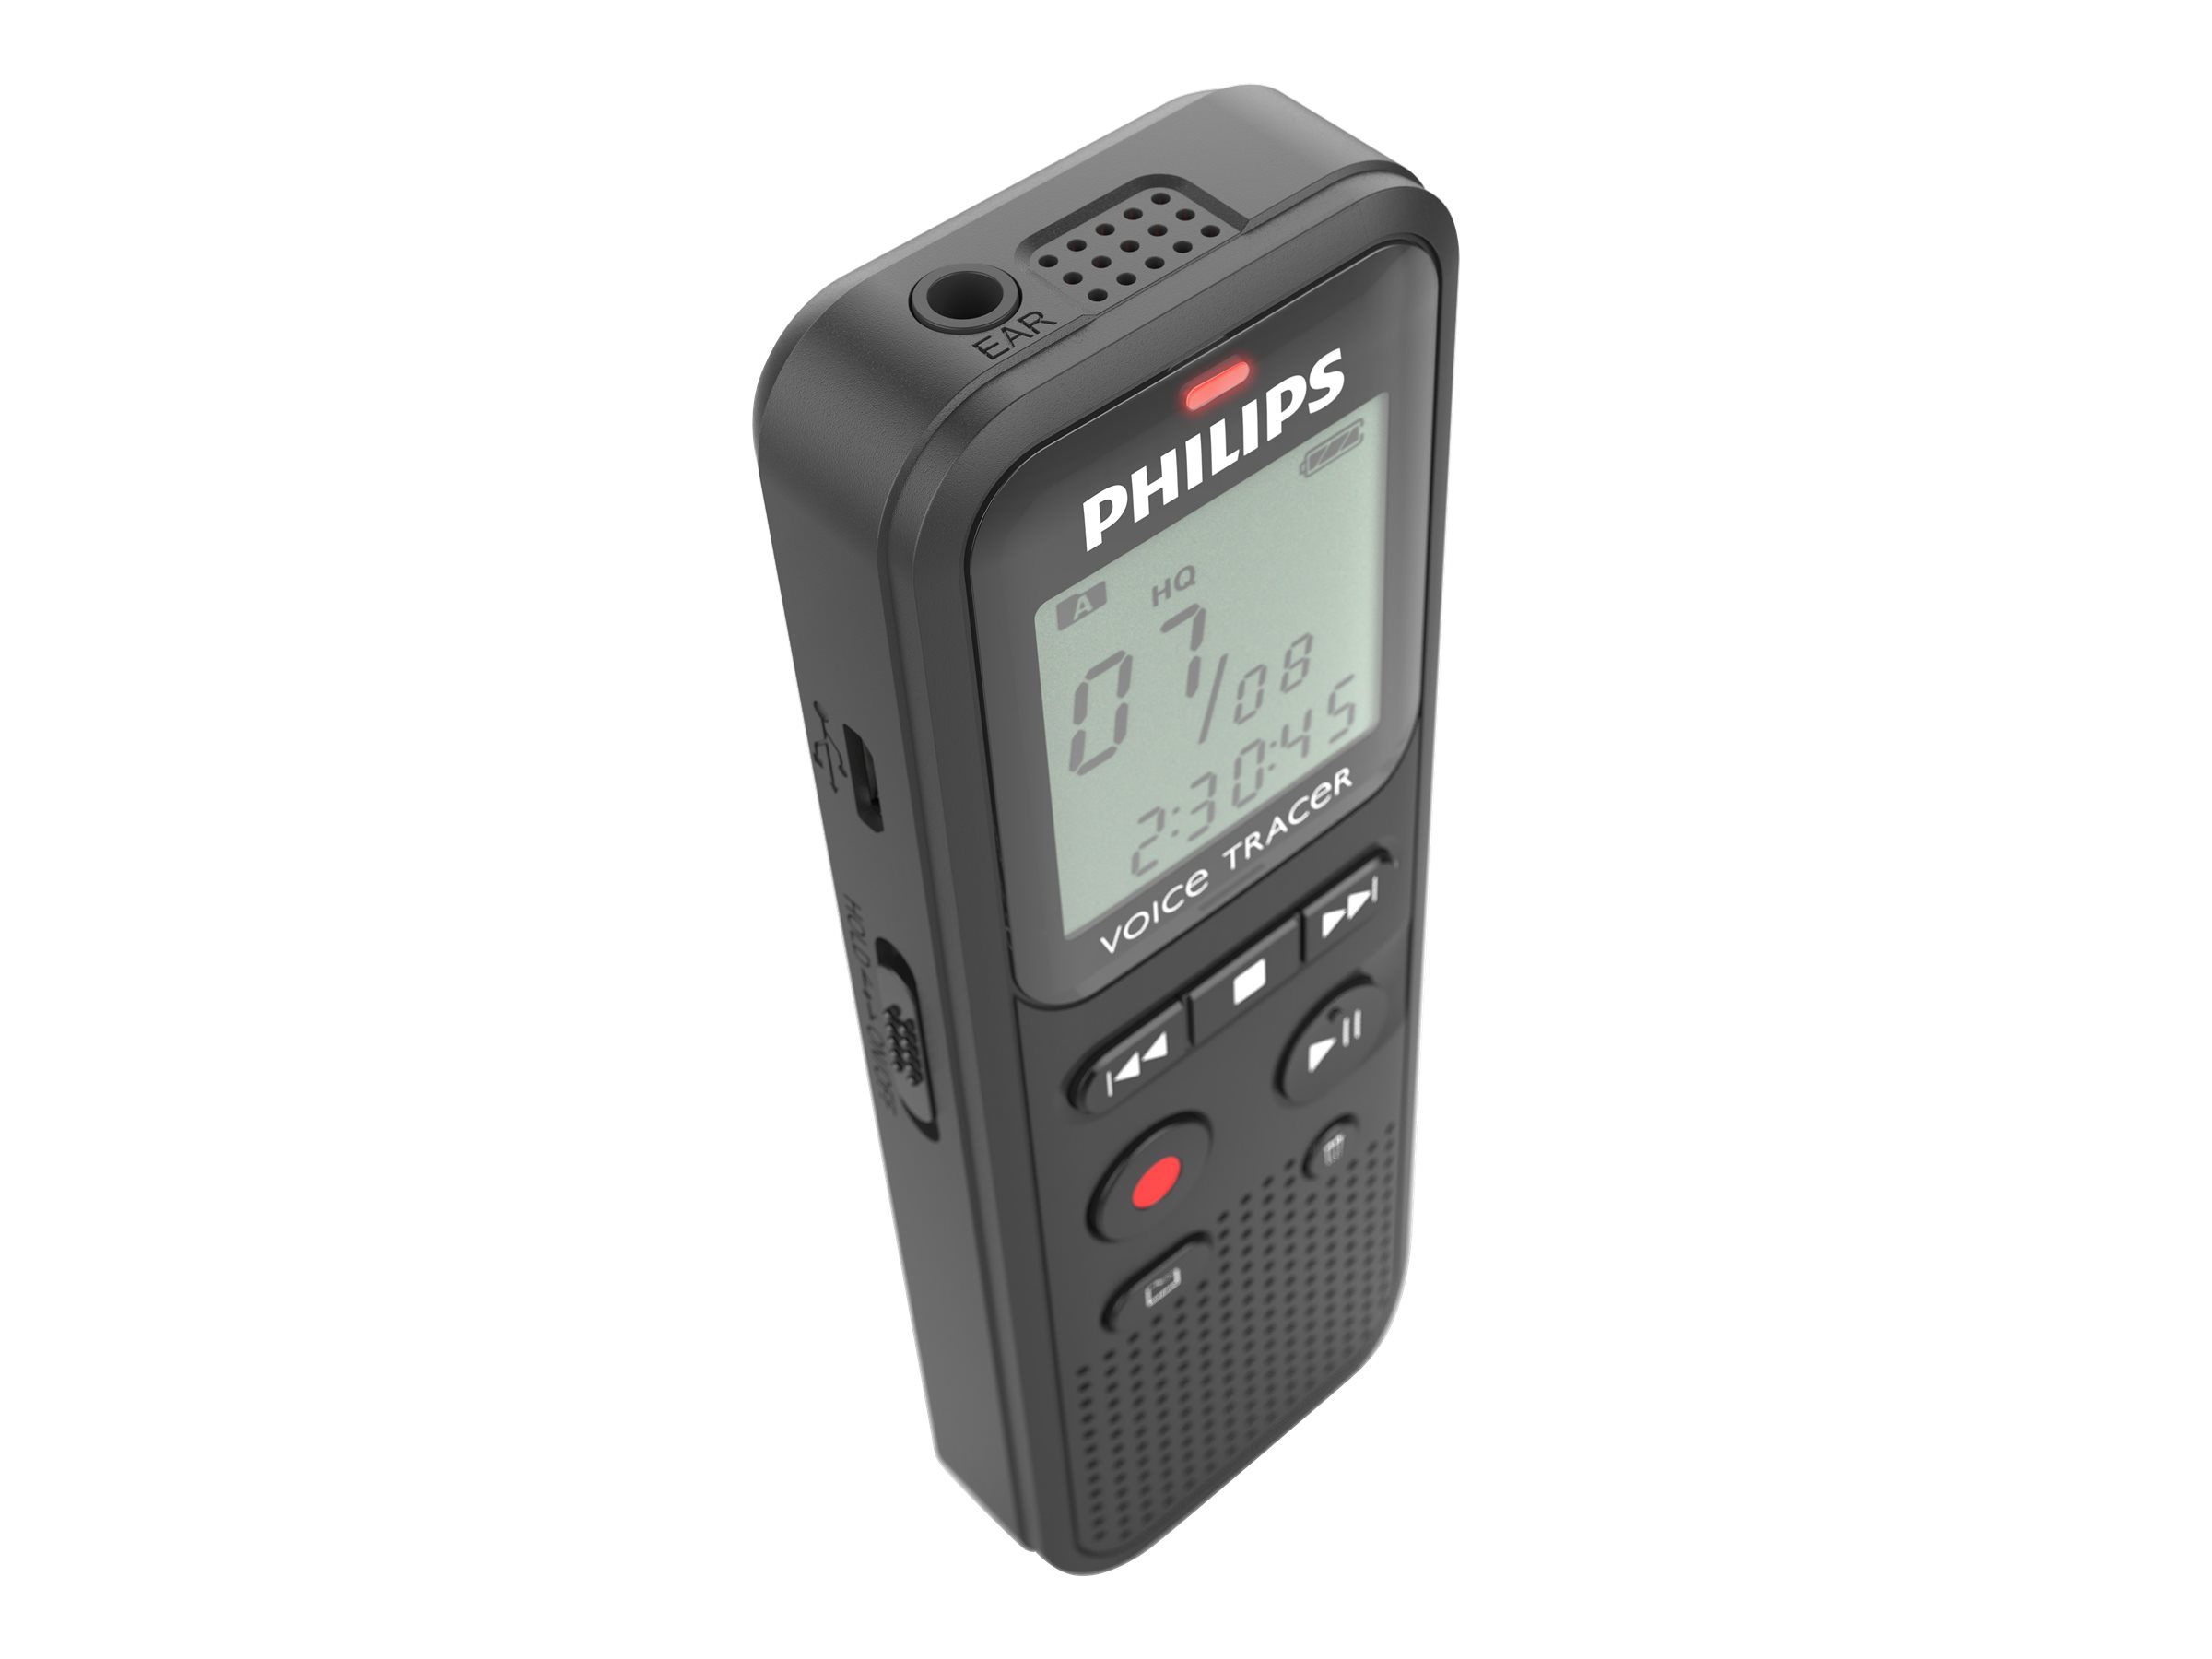 Philips Voice Tracer DVT1150 - Voice recorder - 4 GB - black - image 3 of 7